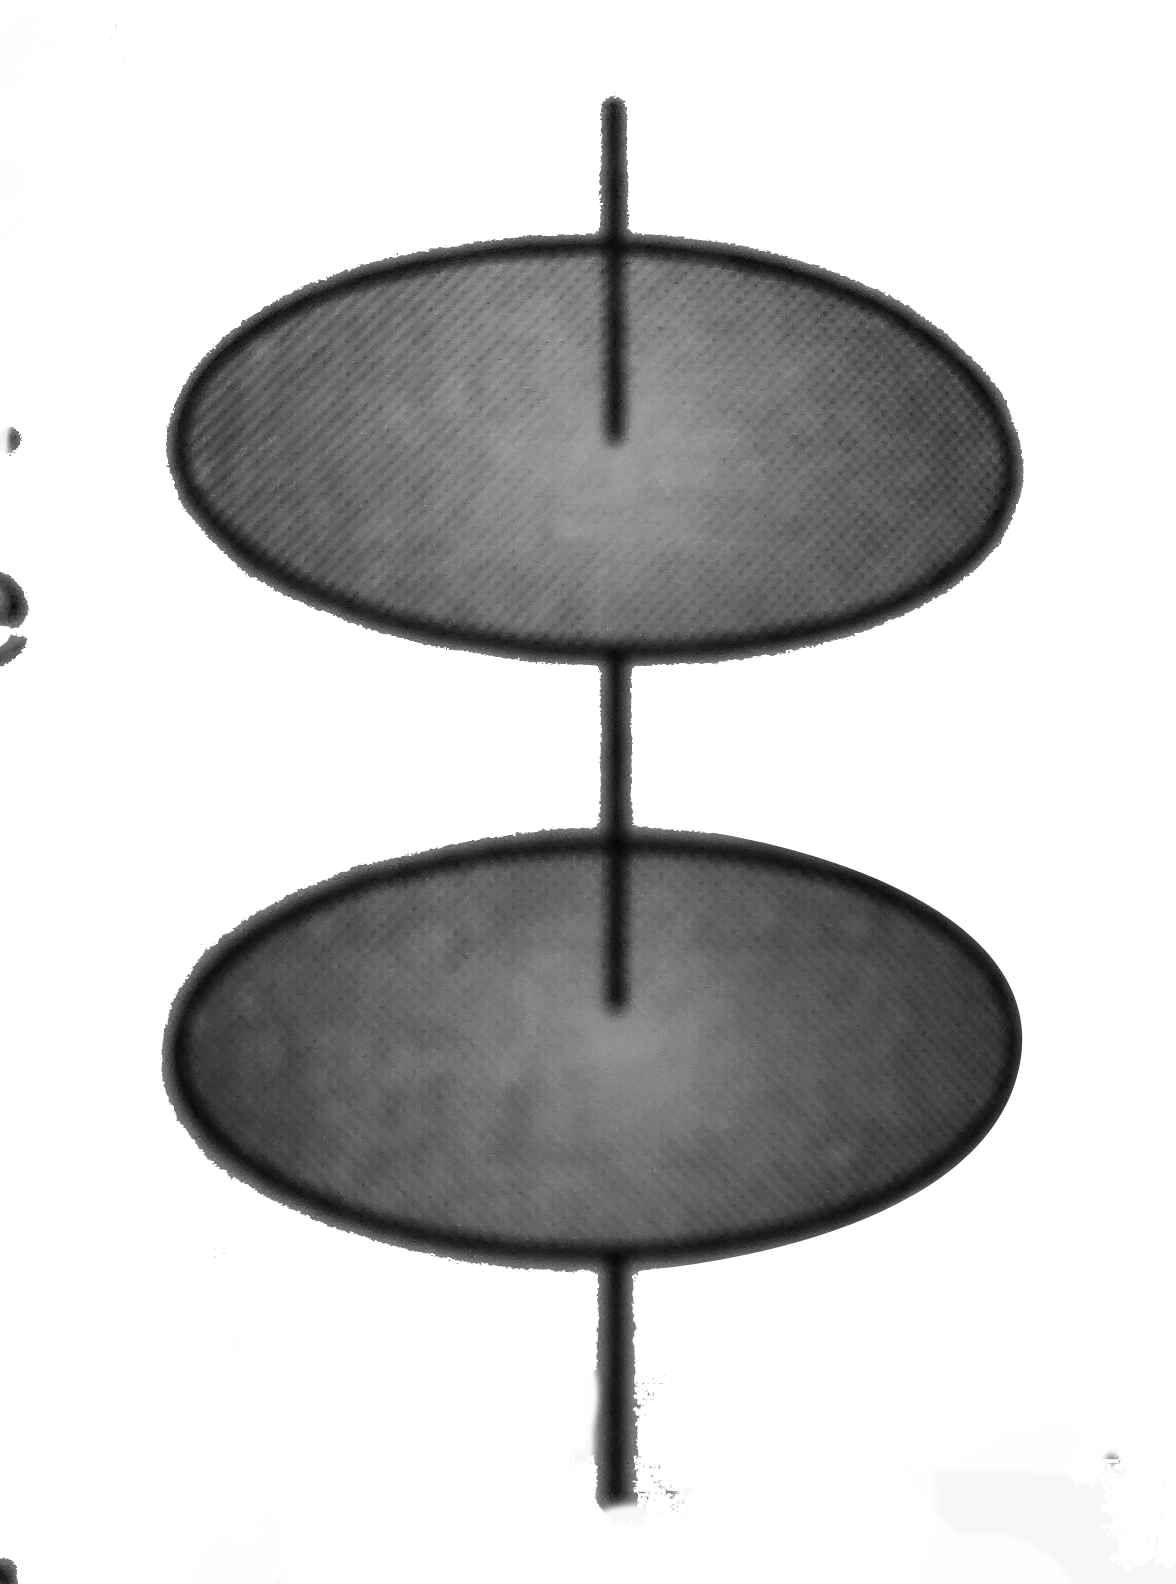 Two identical discs are positioned on a vertical axis as shown in the figure. The bottom disc is rotating at angular velocity omega(0) and has rotational kinetic energy K(0).The top disc is initially at rest. It then falls and sticks to the bottom disc. The change in the rotational kinetic energy of the system is